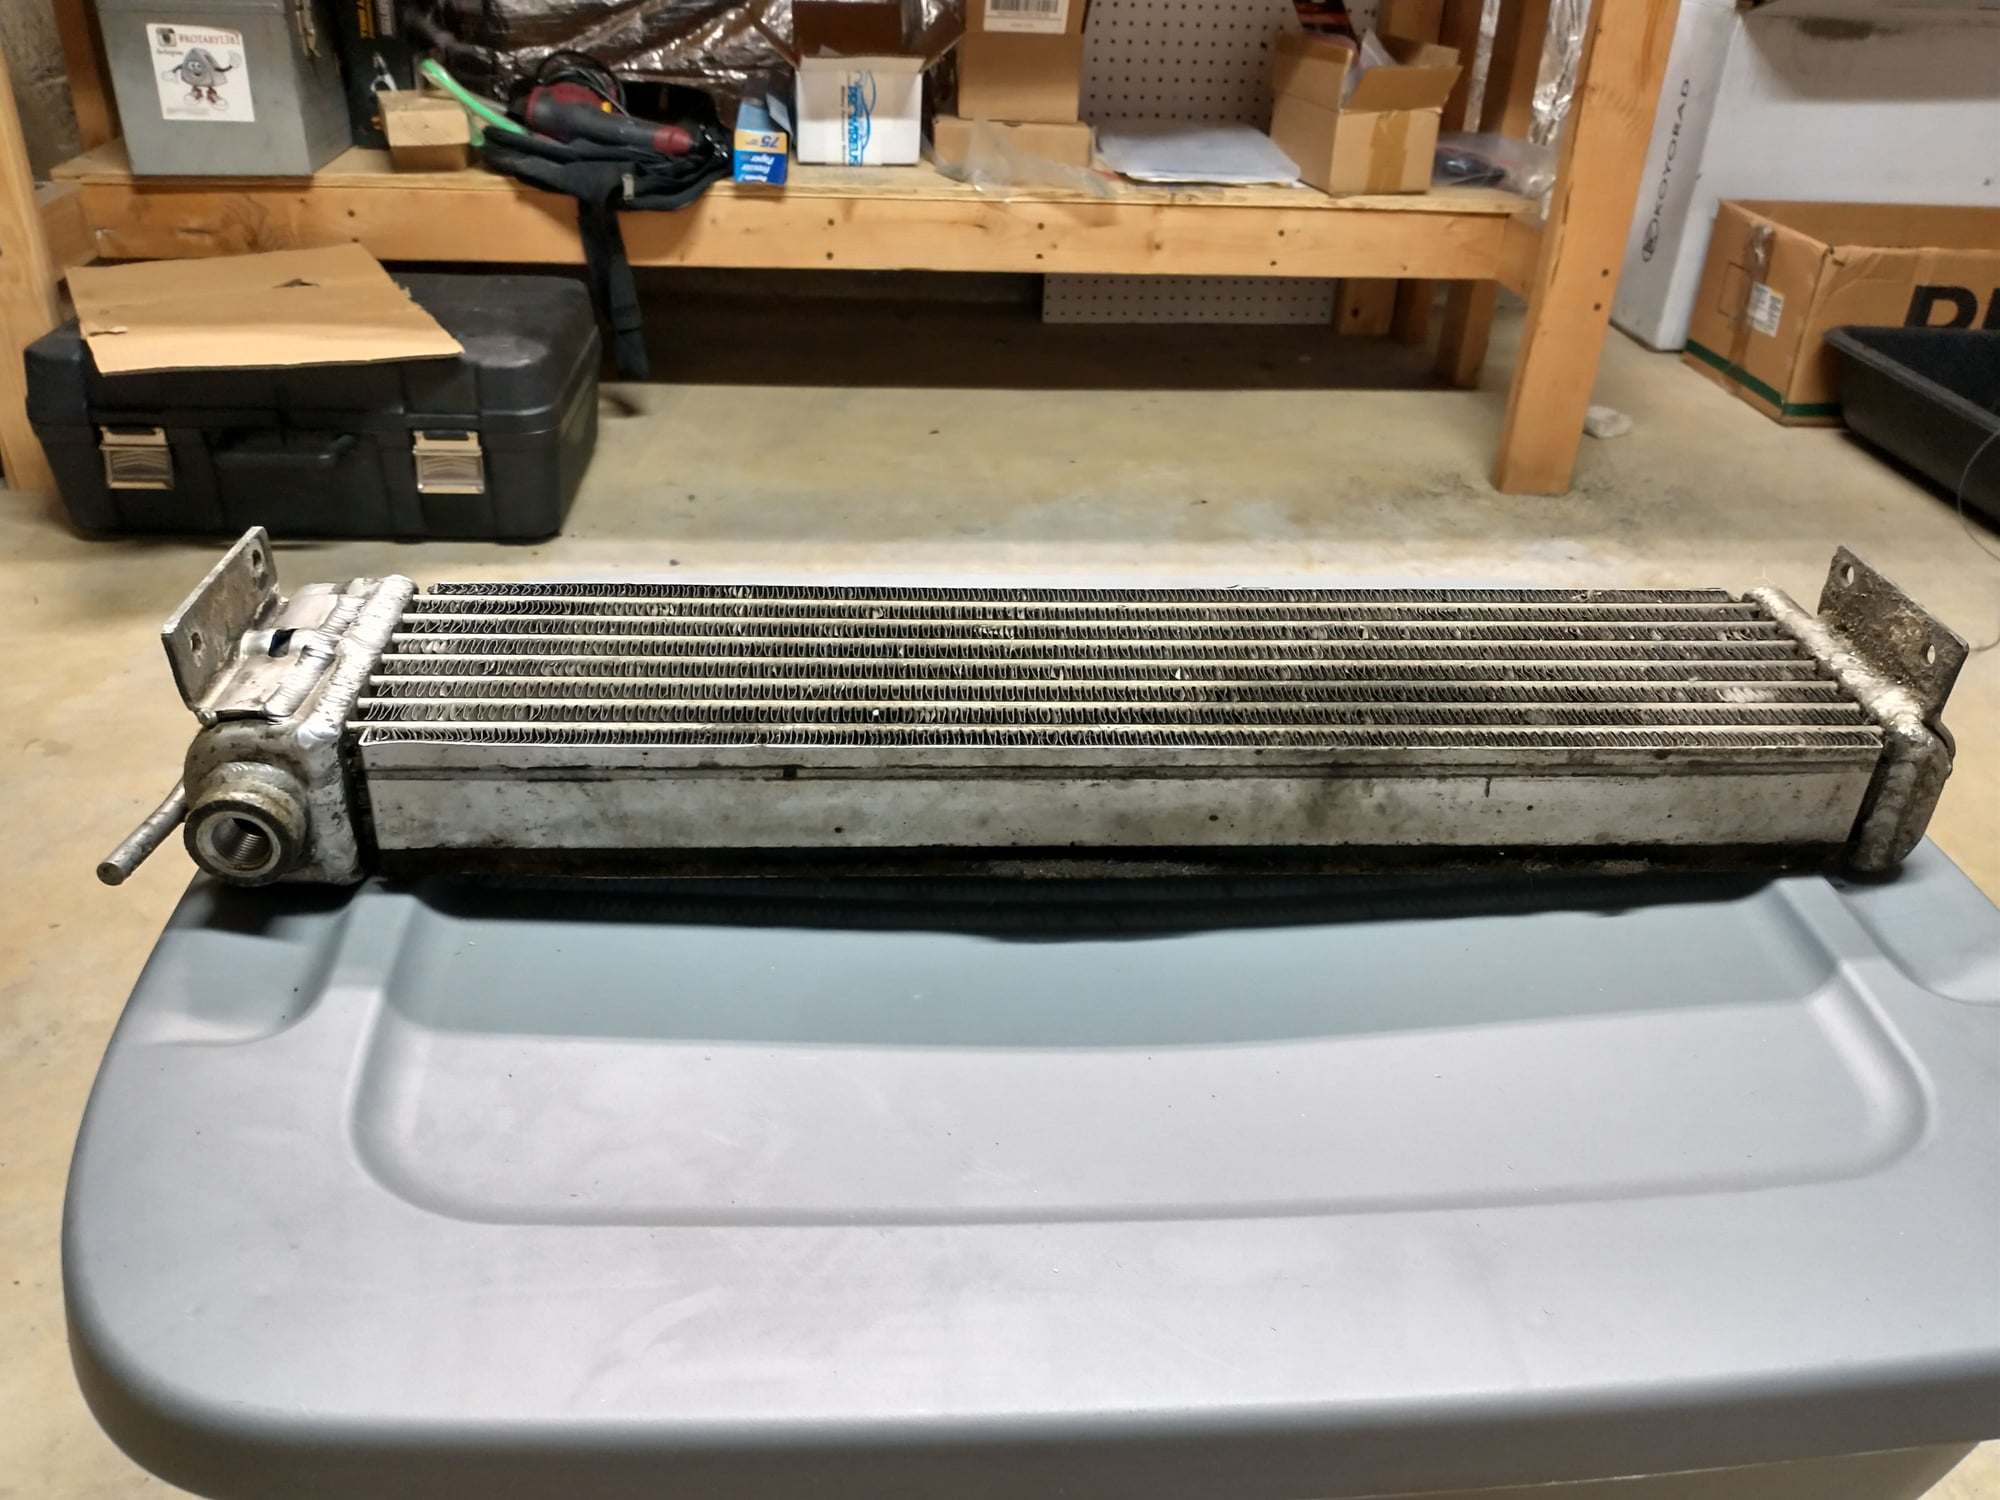 Miscellaneous - FC Oil Cooler - Used - 1986 to 1991 Mazda RX-7 - Elkton, MD 21921, United States